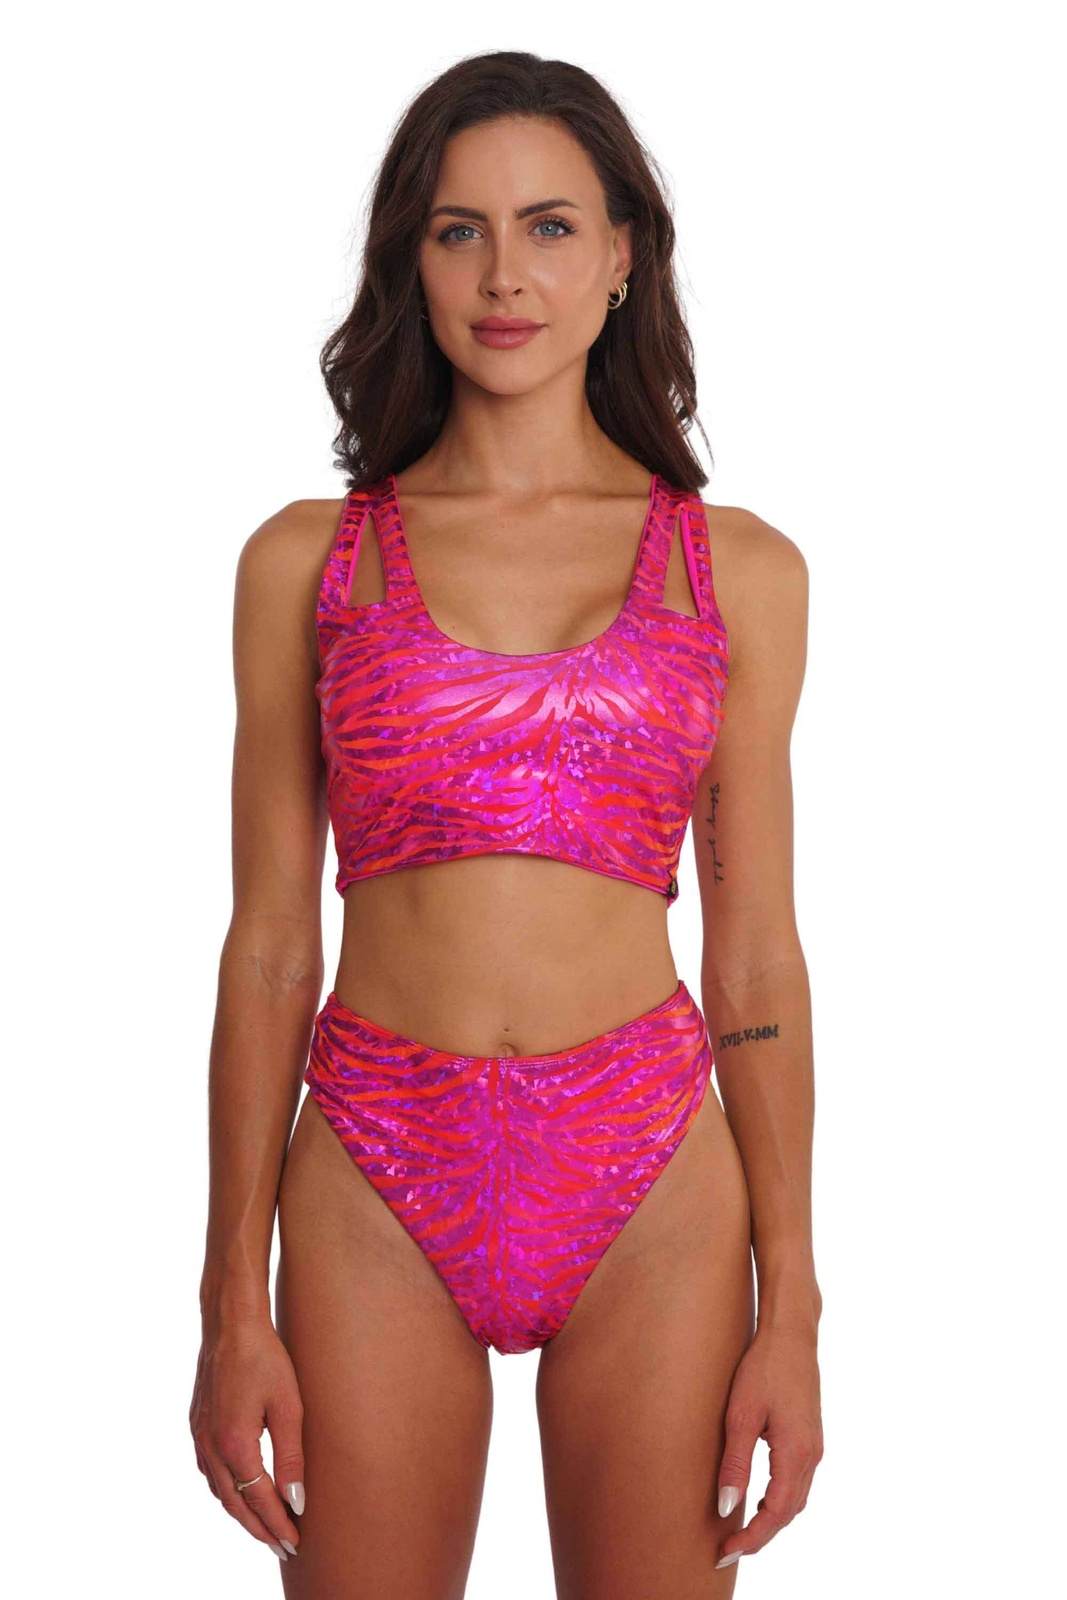 Bliss High Cut Hot Pink Rave Bottoms with reflective panel from Love Khaos